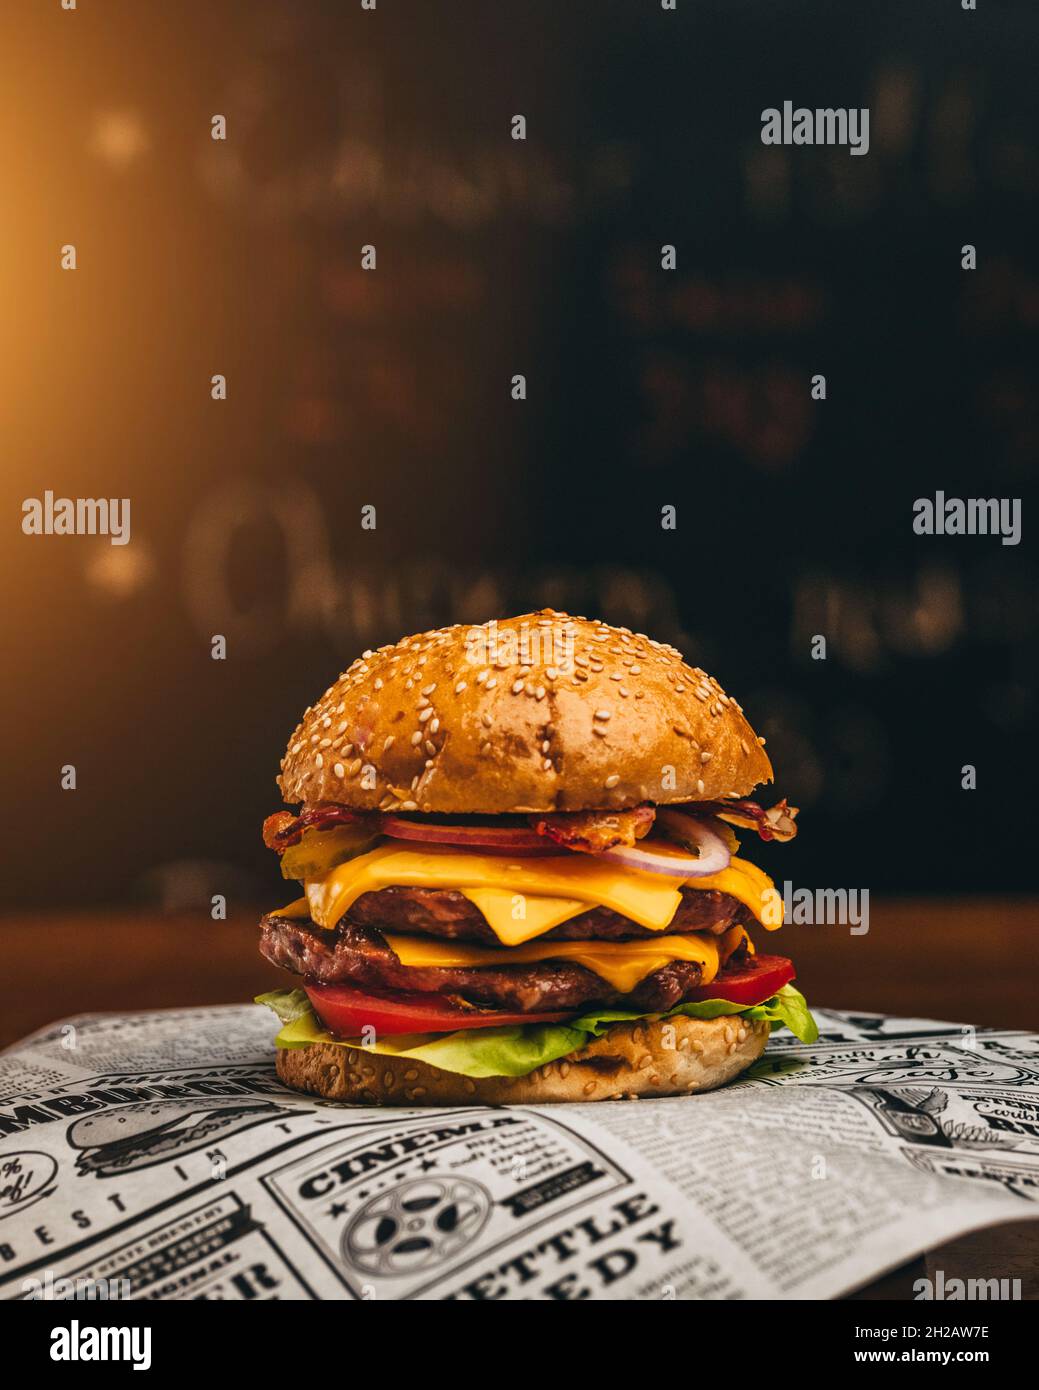 Delicious burger with lettuce, cheese, cucumbers, onion and tomato on dark background CLOSE UP Stock Photo